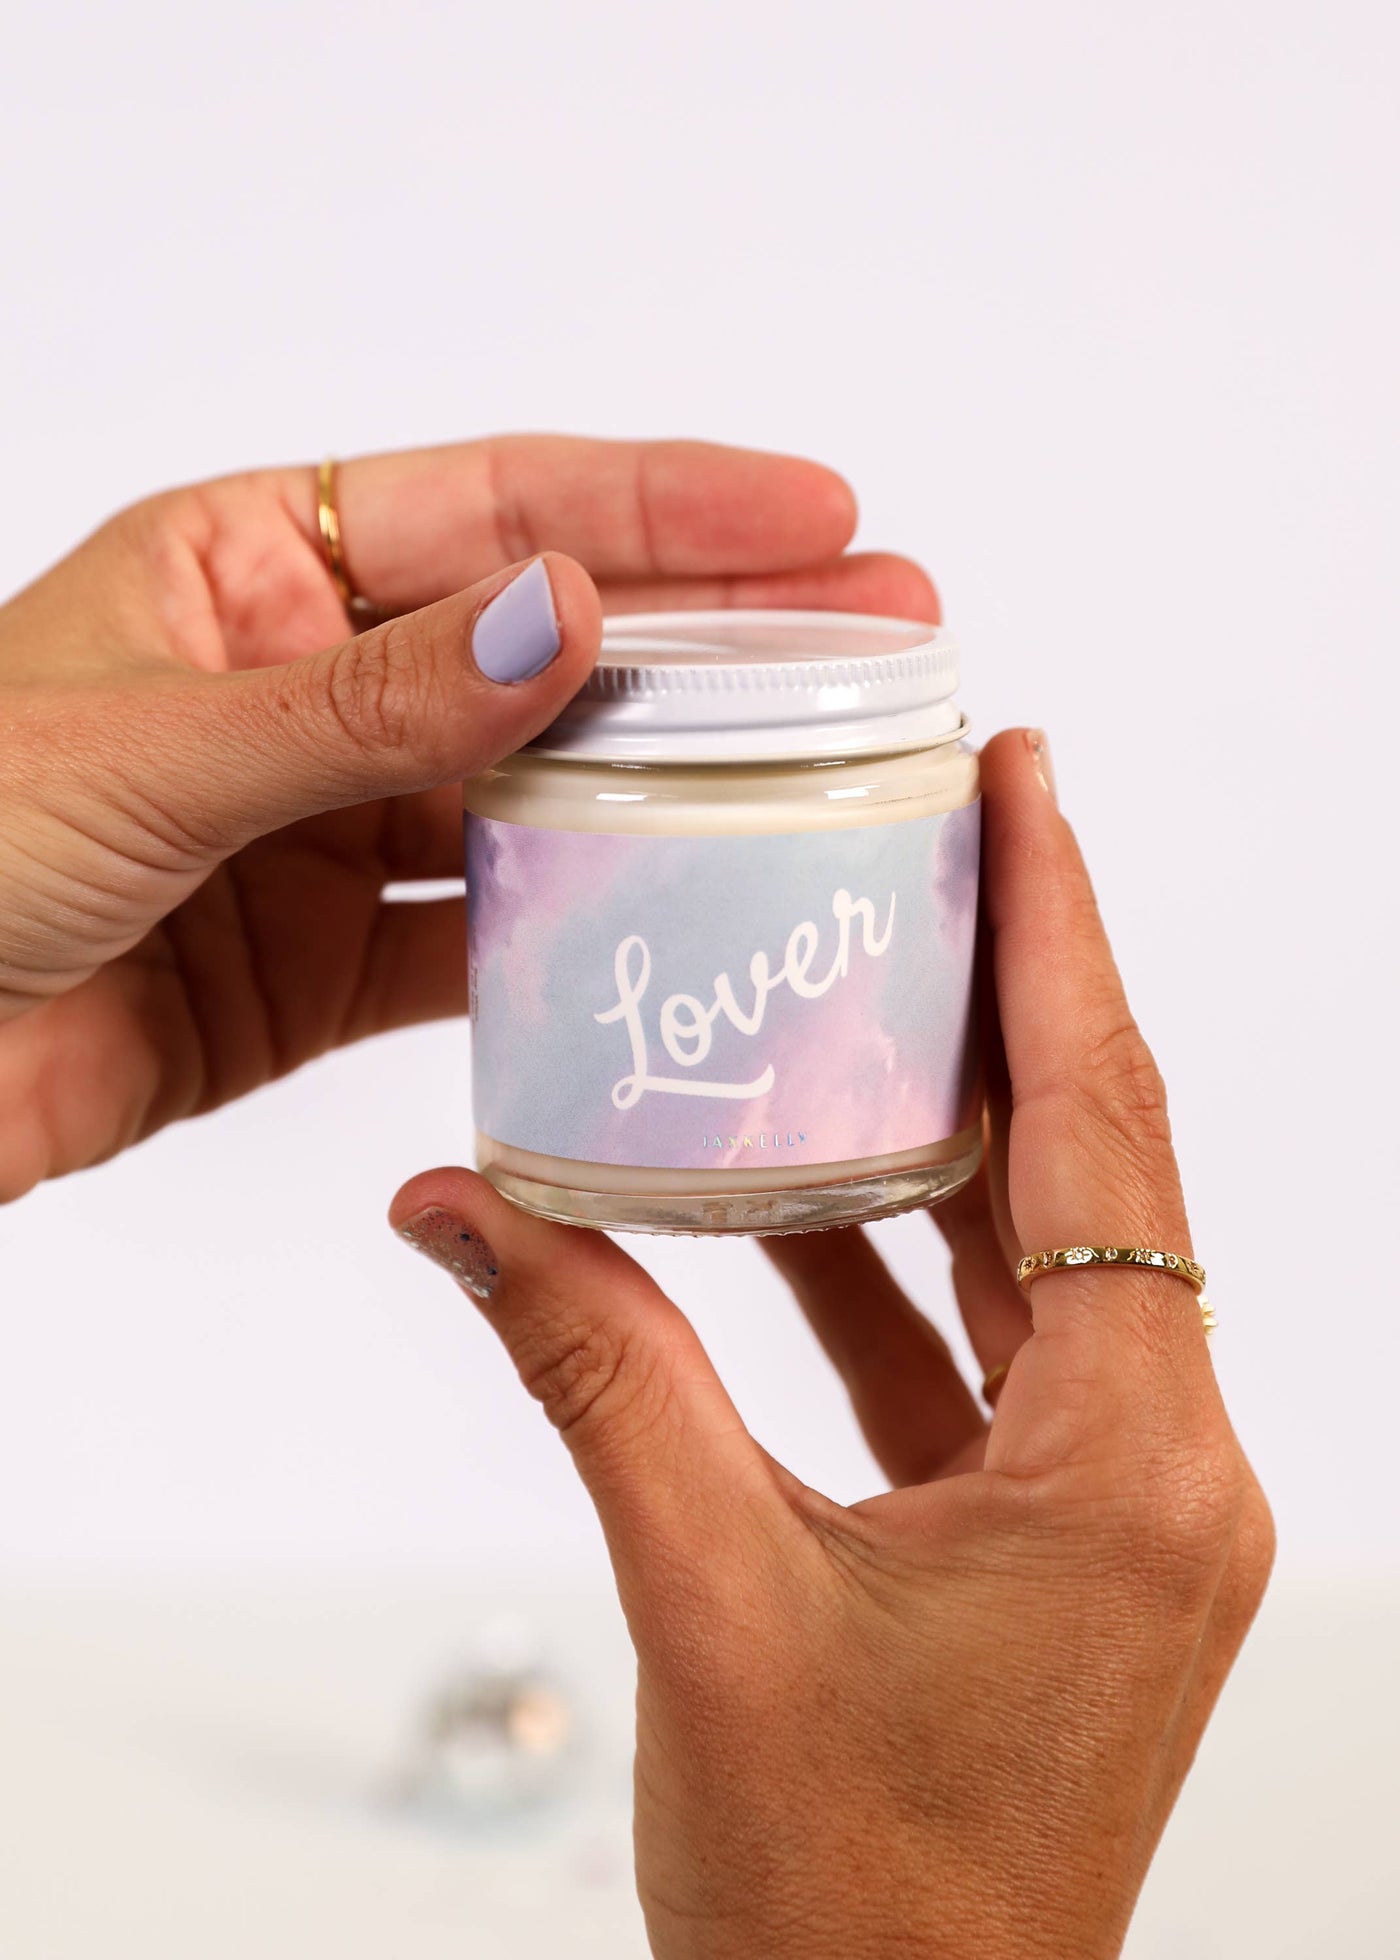 Lover Candle - Taylor Swift Inspired